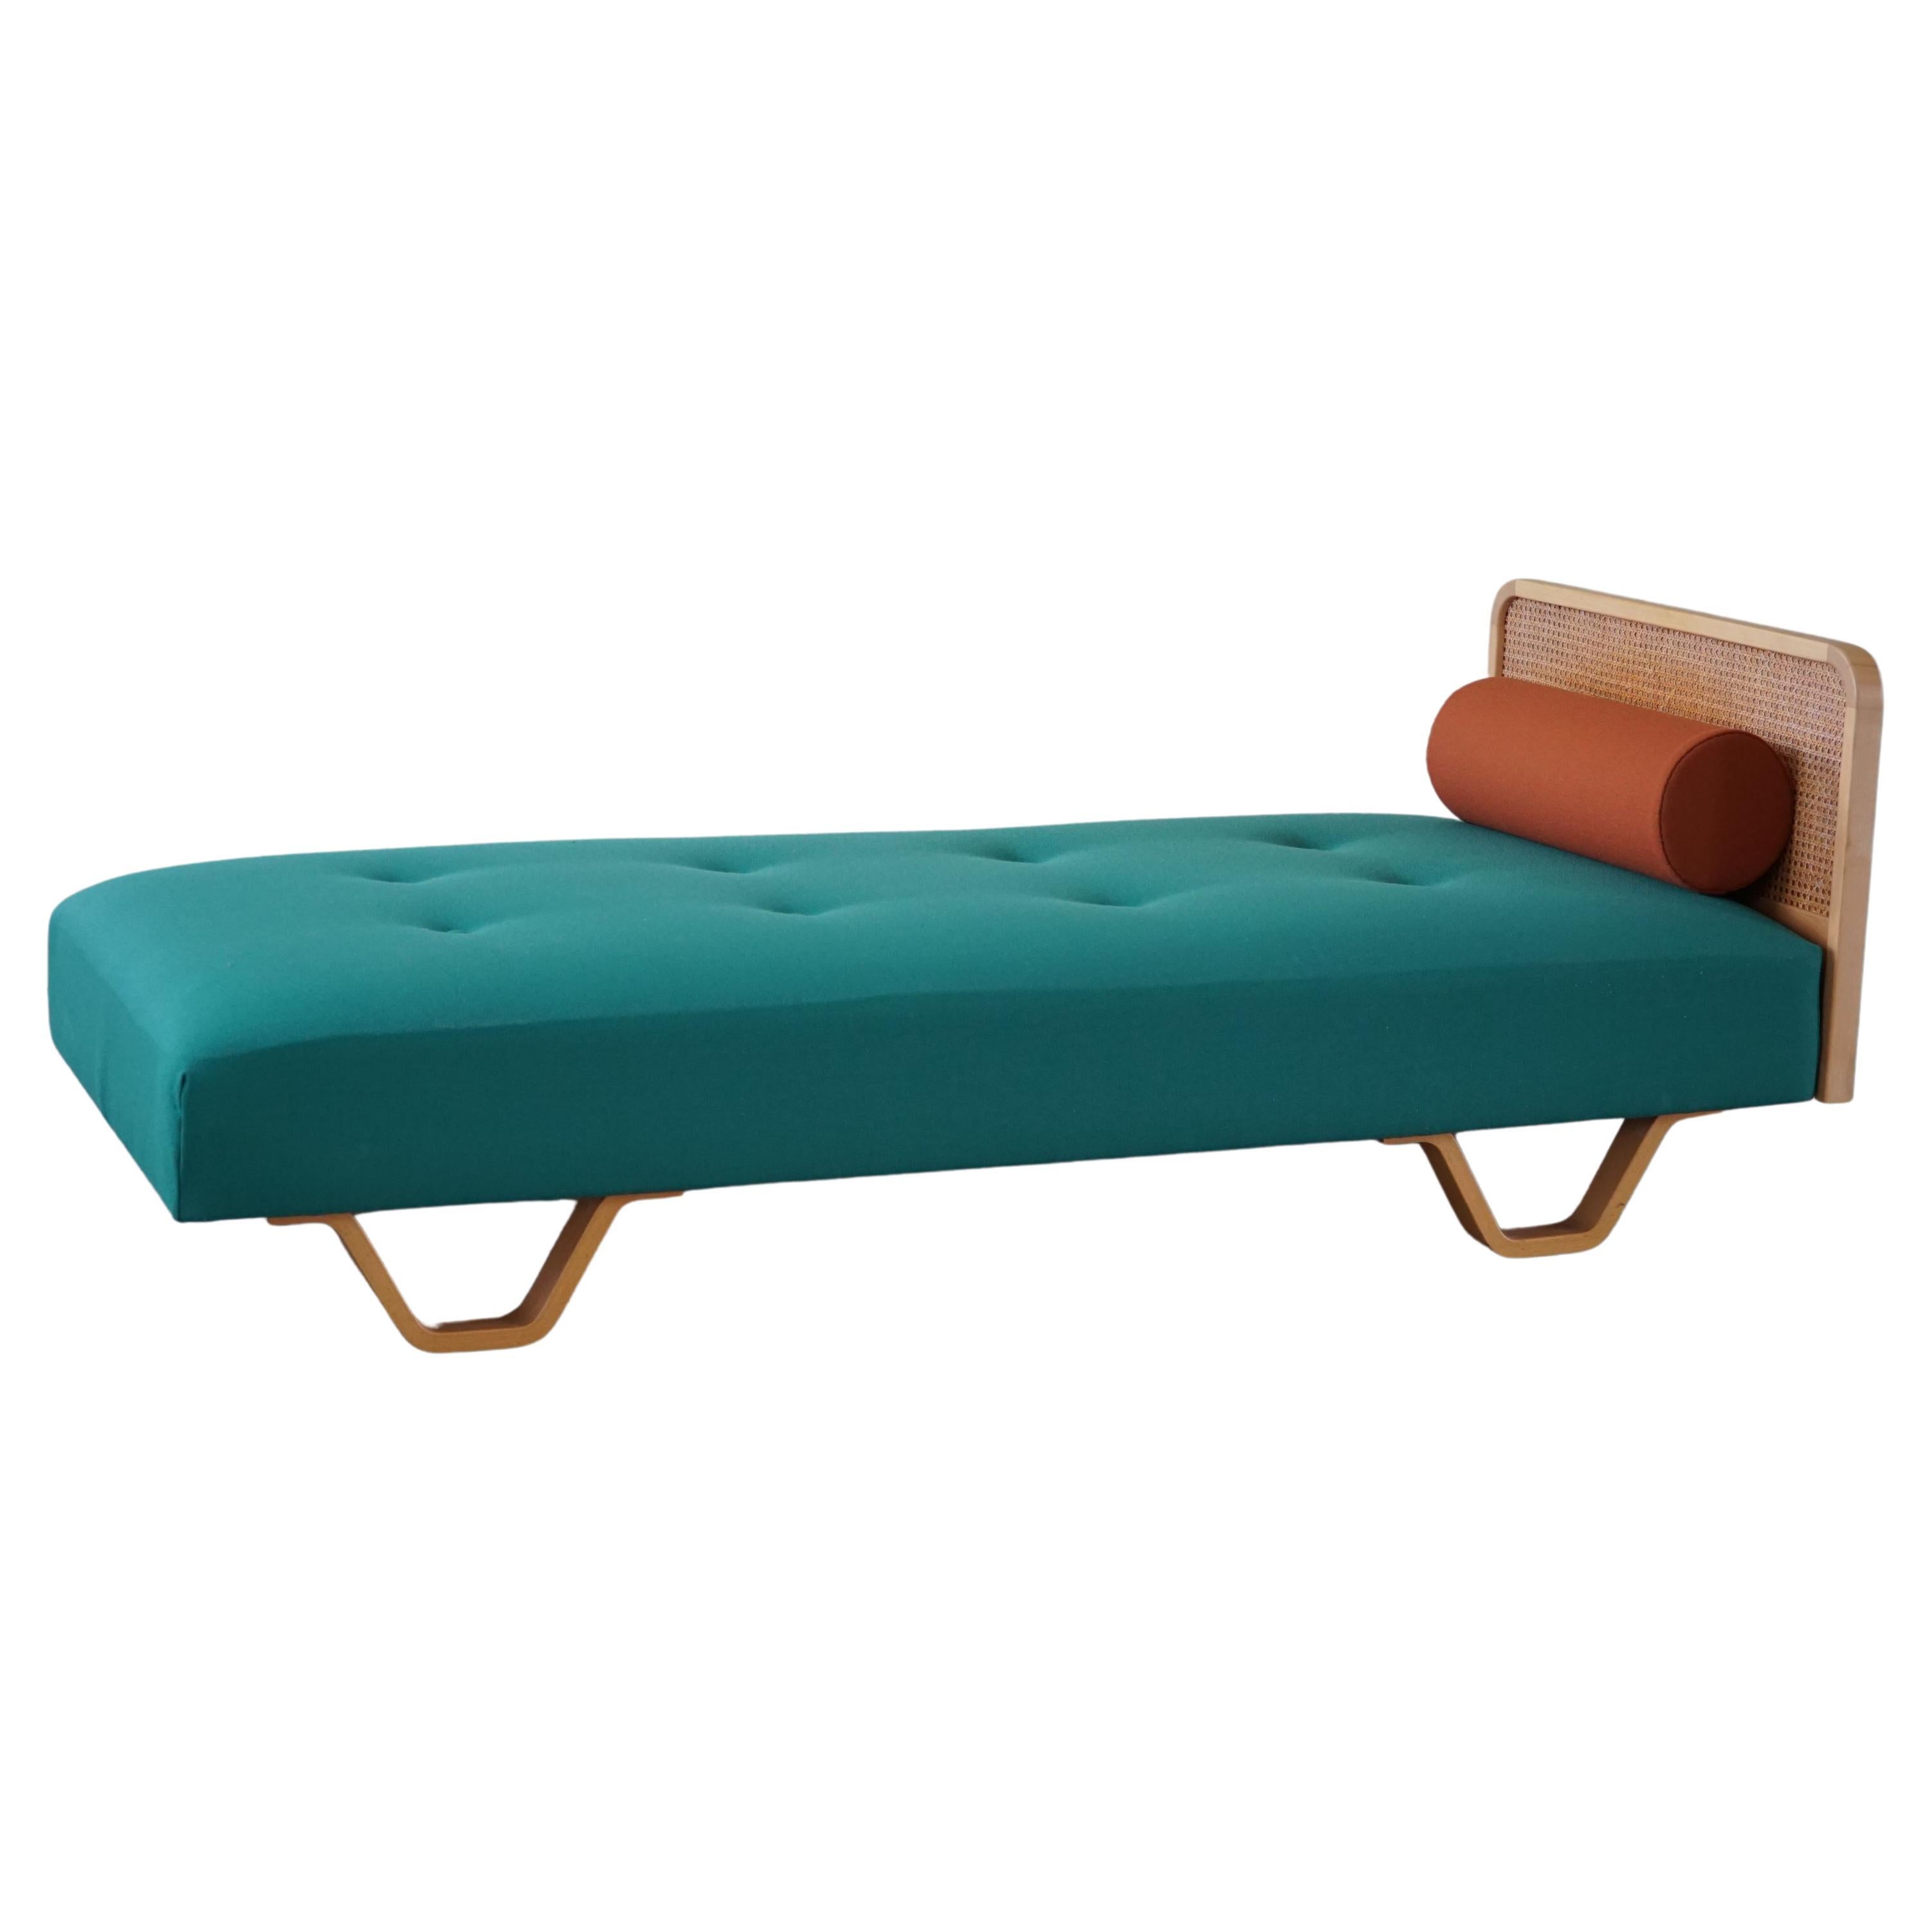 Danish Modern Daybed, Reupholstered in Kvadrat Fabric, Made by GETAMA, 1980s 